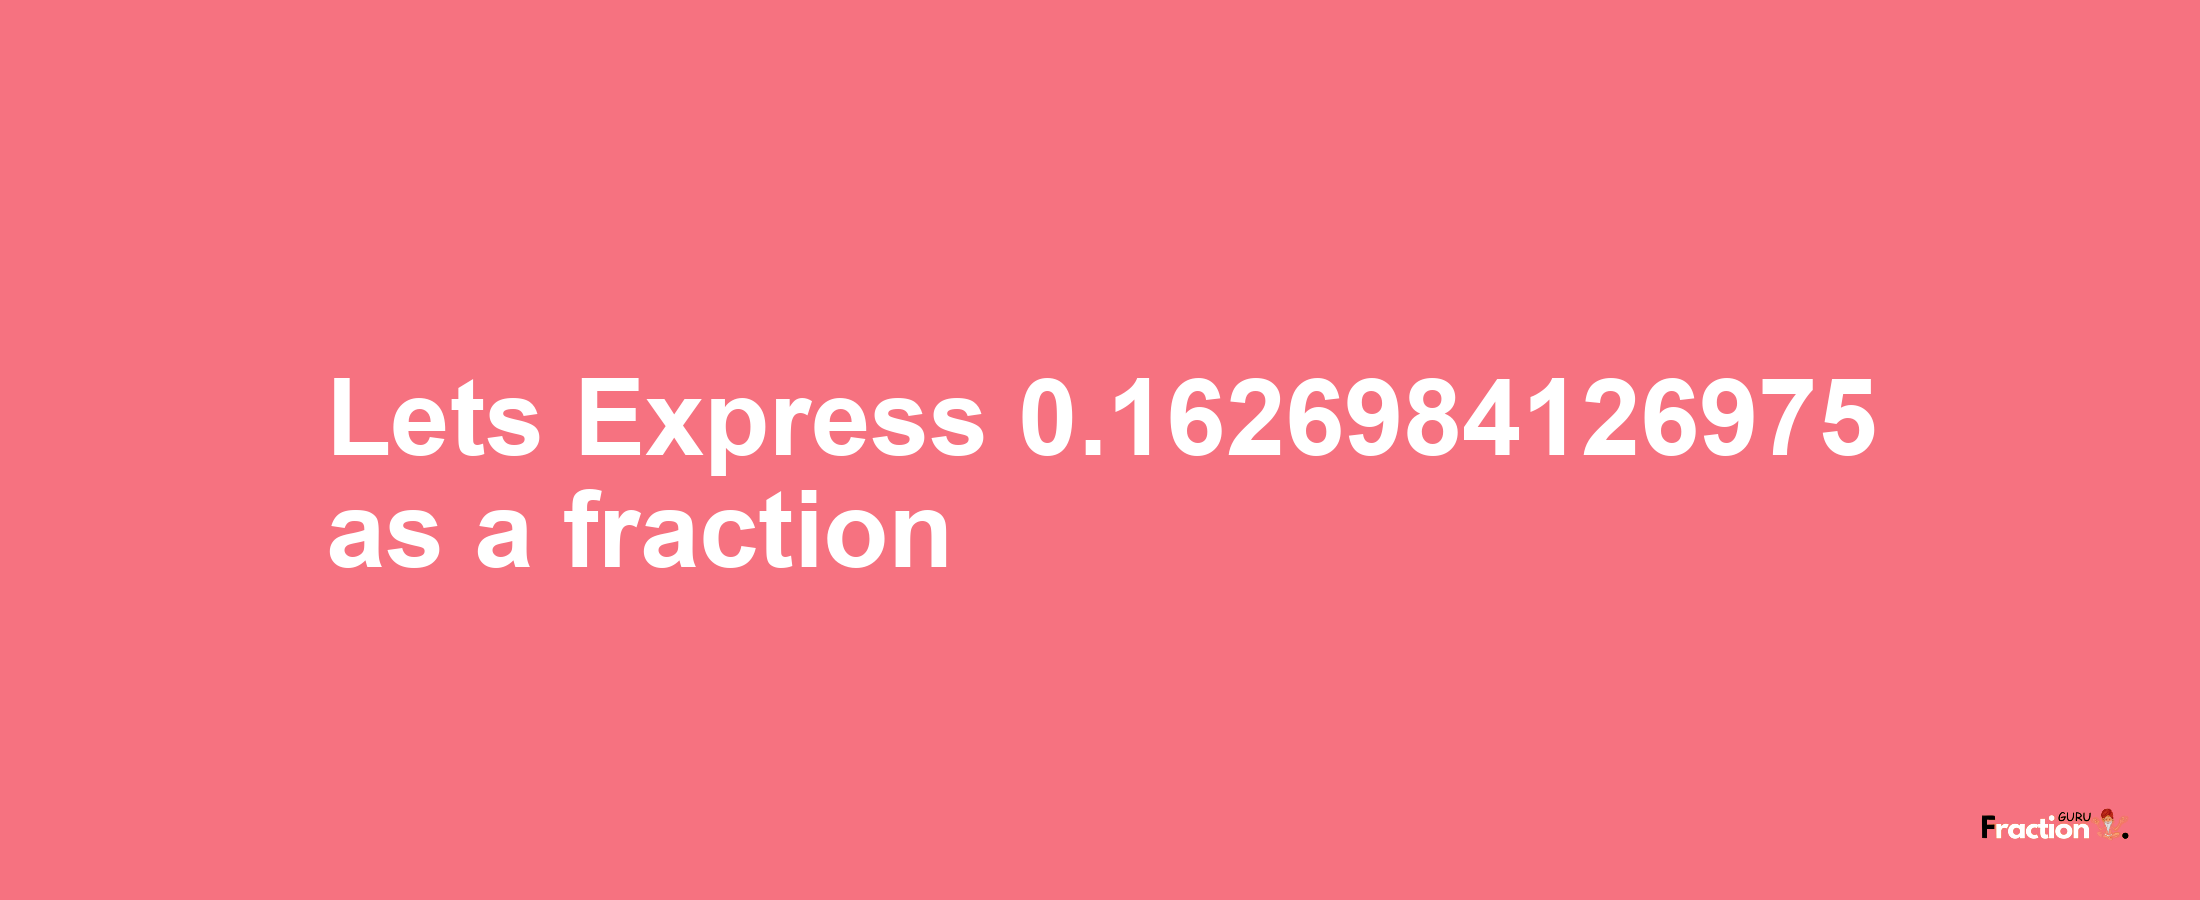 Lets Express 0.1626984126975 as afraction